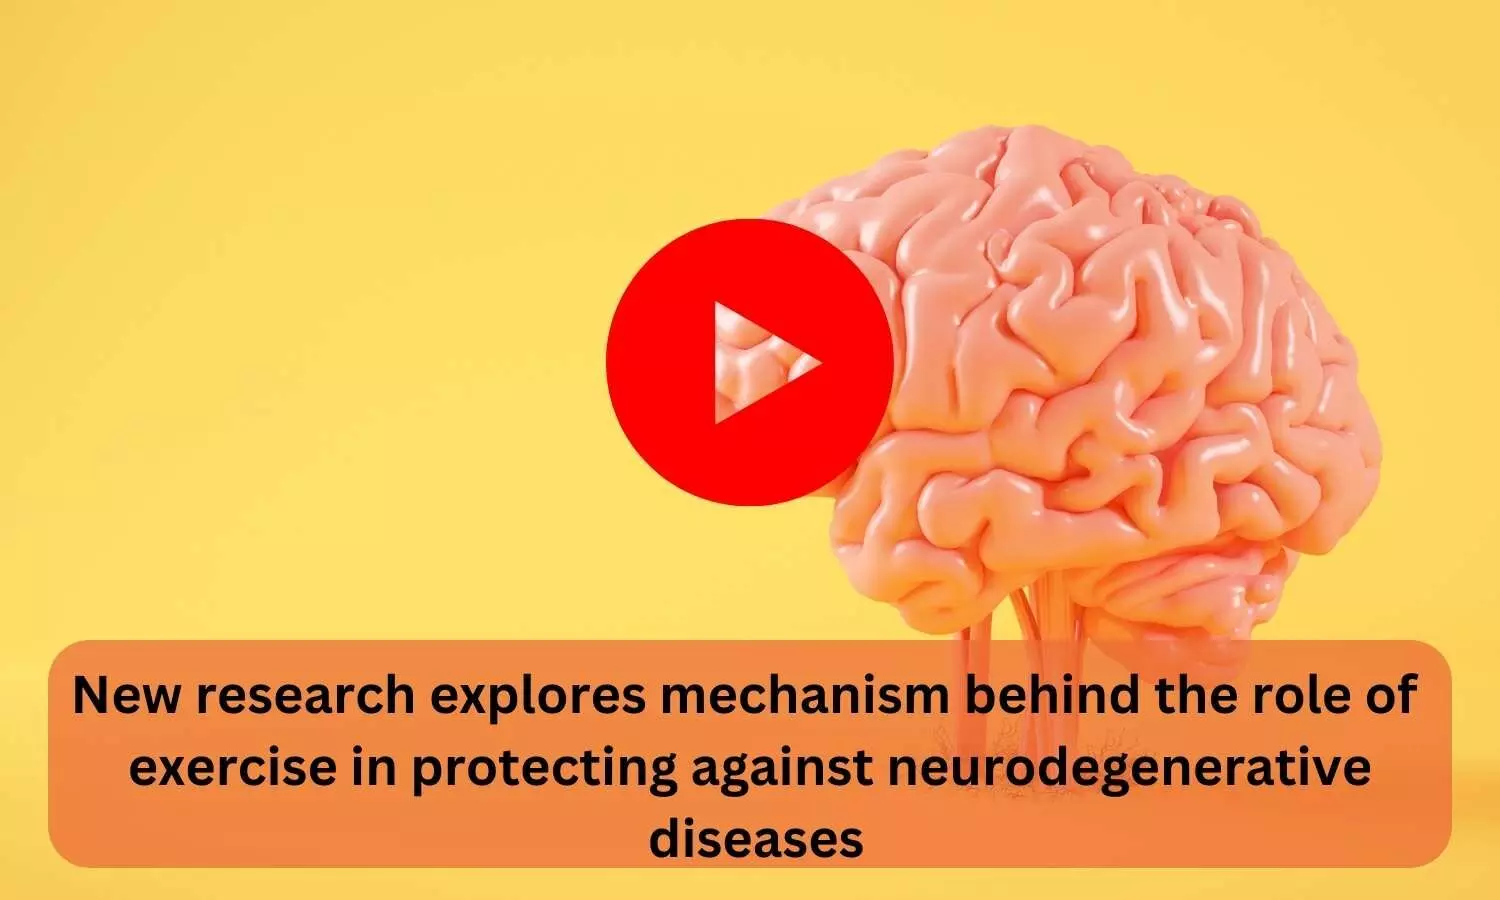 New research explores mechanism behind the role of exercise in protecting against neurodegenerative diseases